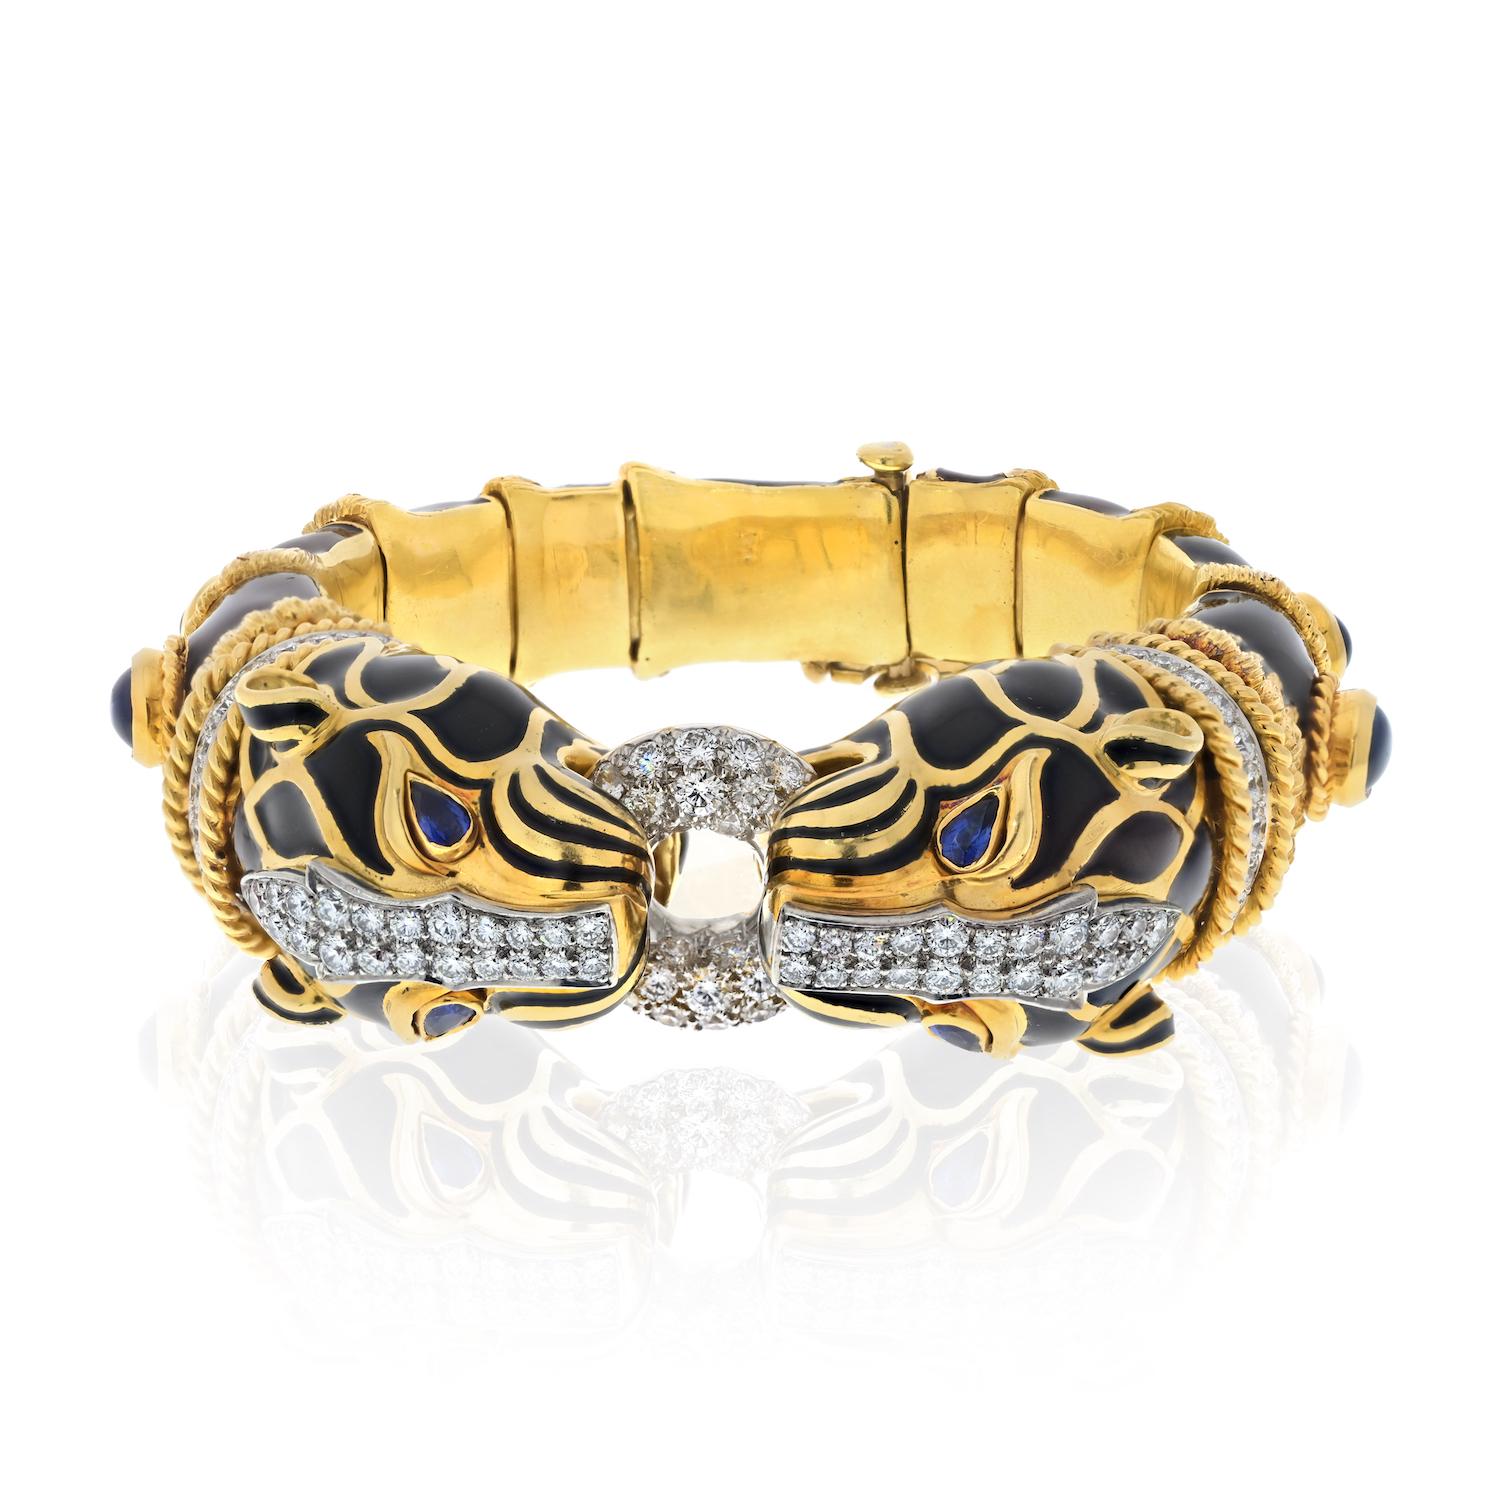 Prepare to be captivated by the extraordinary beauty and rarity of this vintage David Webb Double Lion Head Bracelet. Crafted with meticulous attention to detail, this exquisite piece showcases the unparalleled artistry and craftsmanship for which